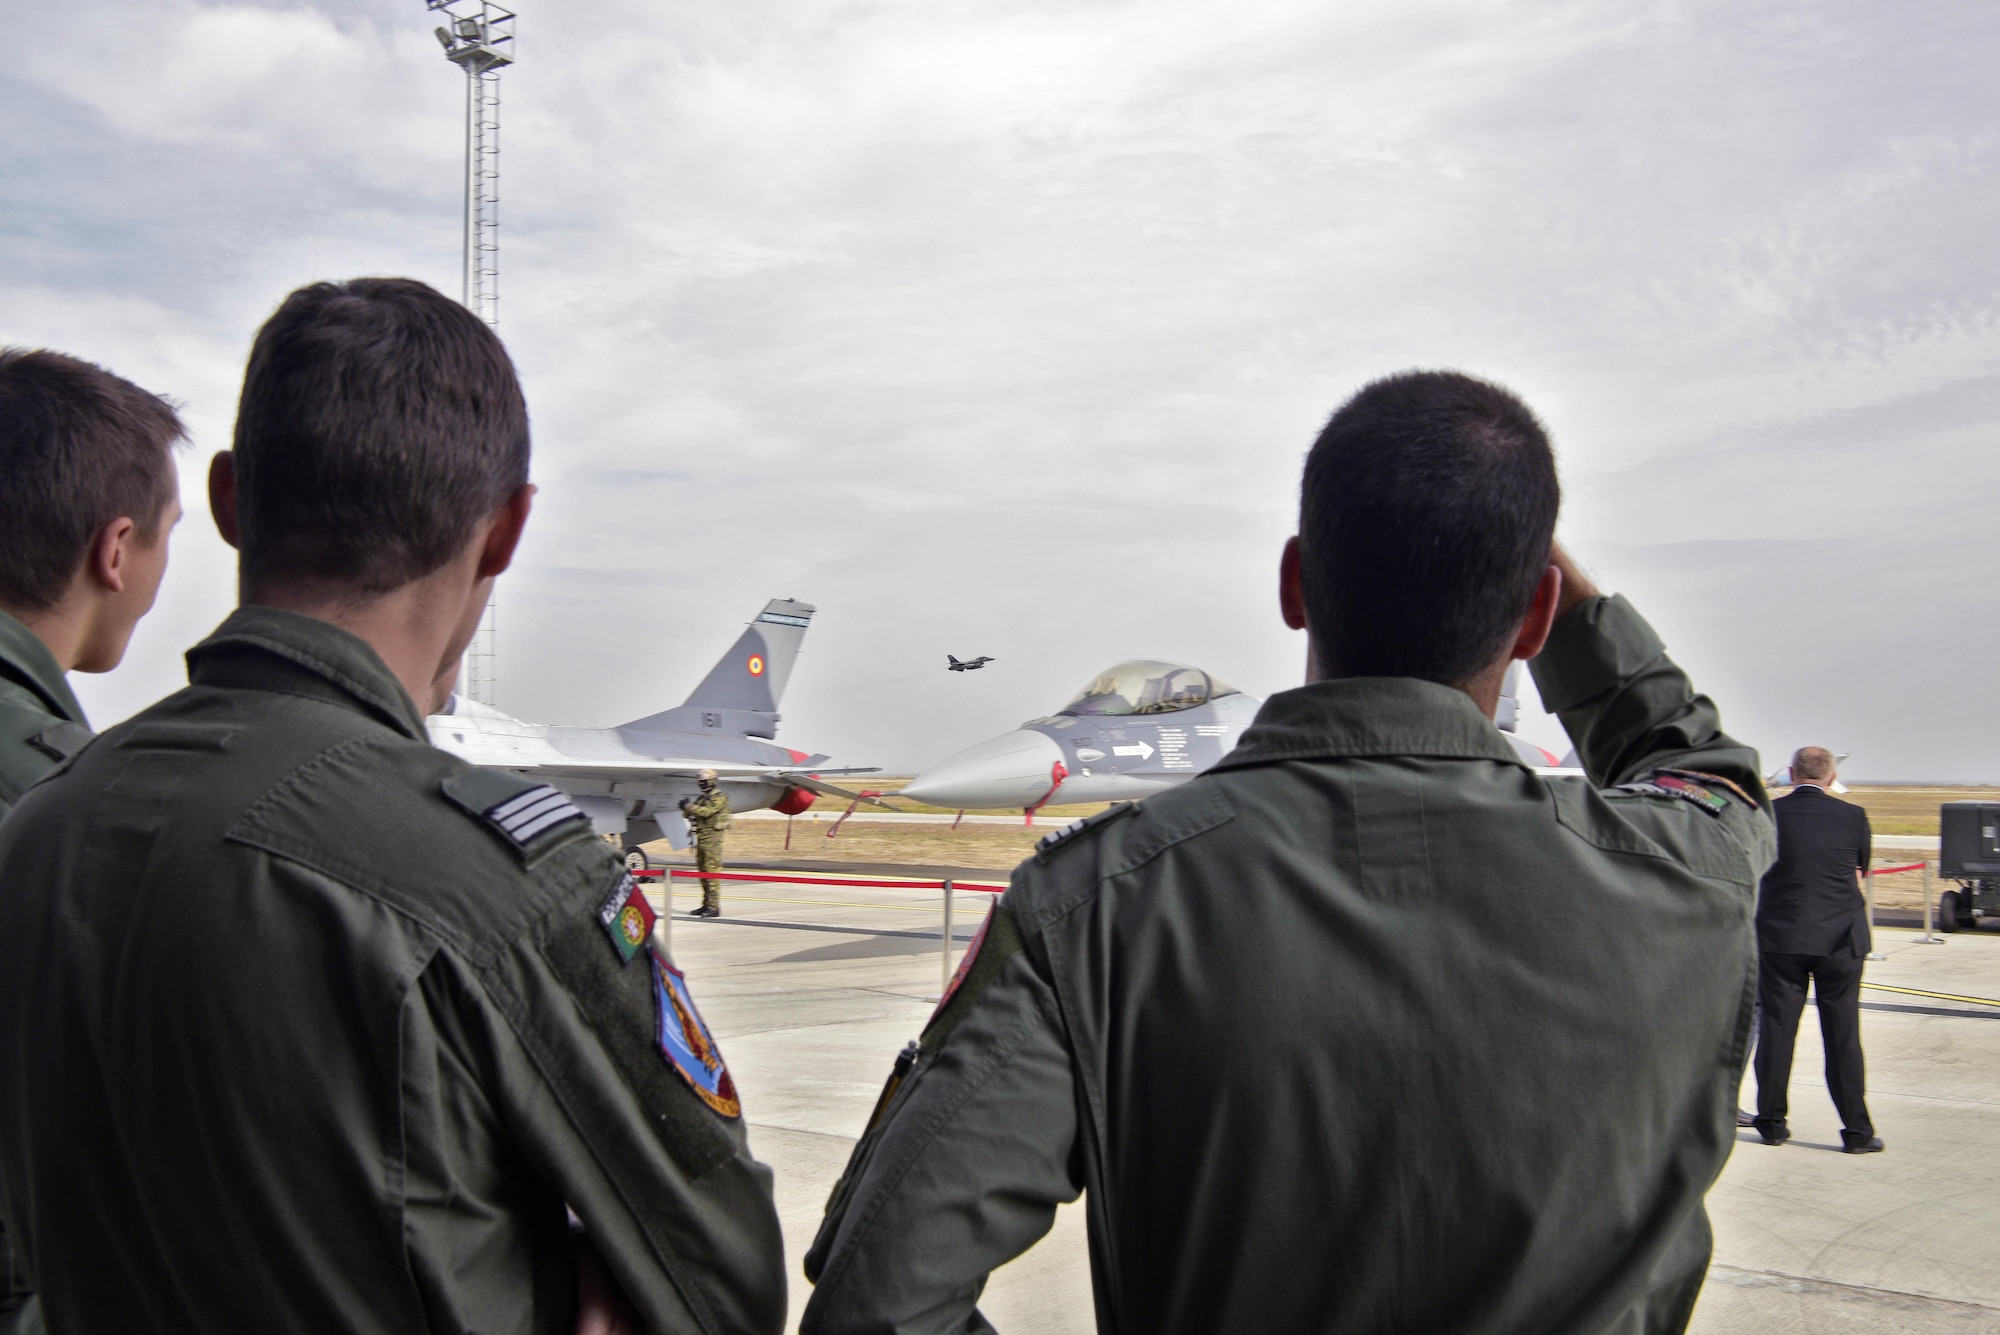 Romania receives final three F-16s from Portugal